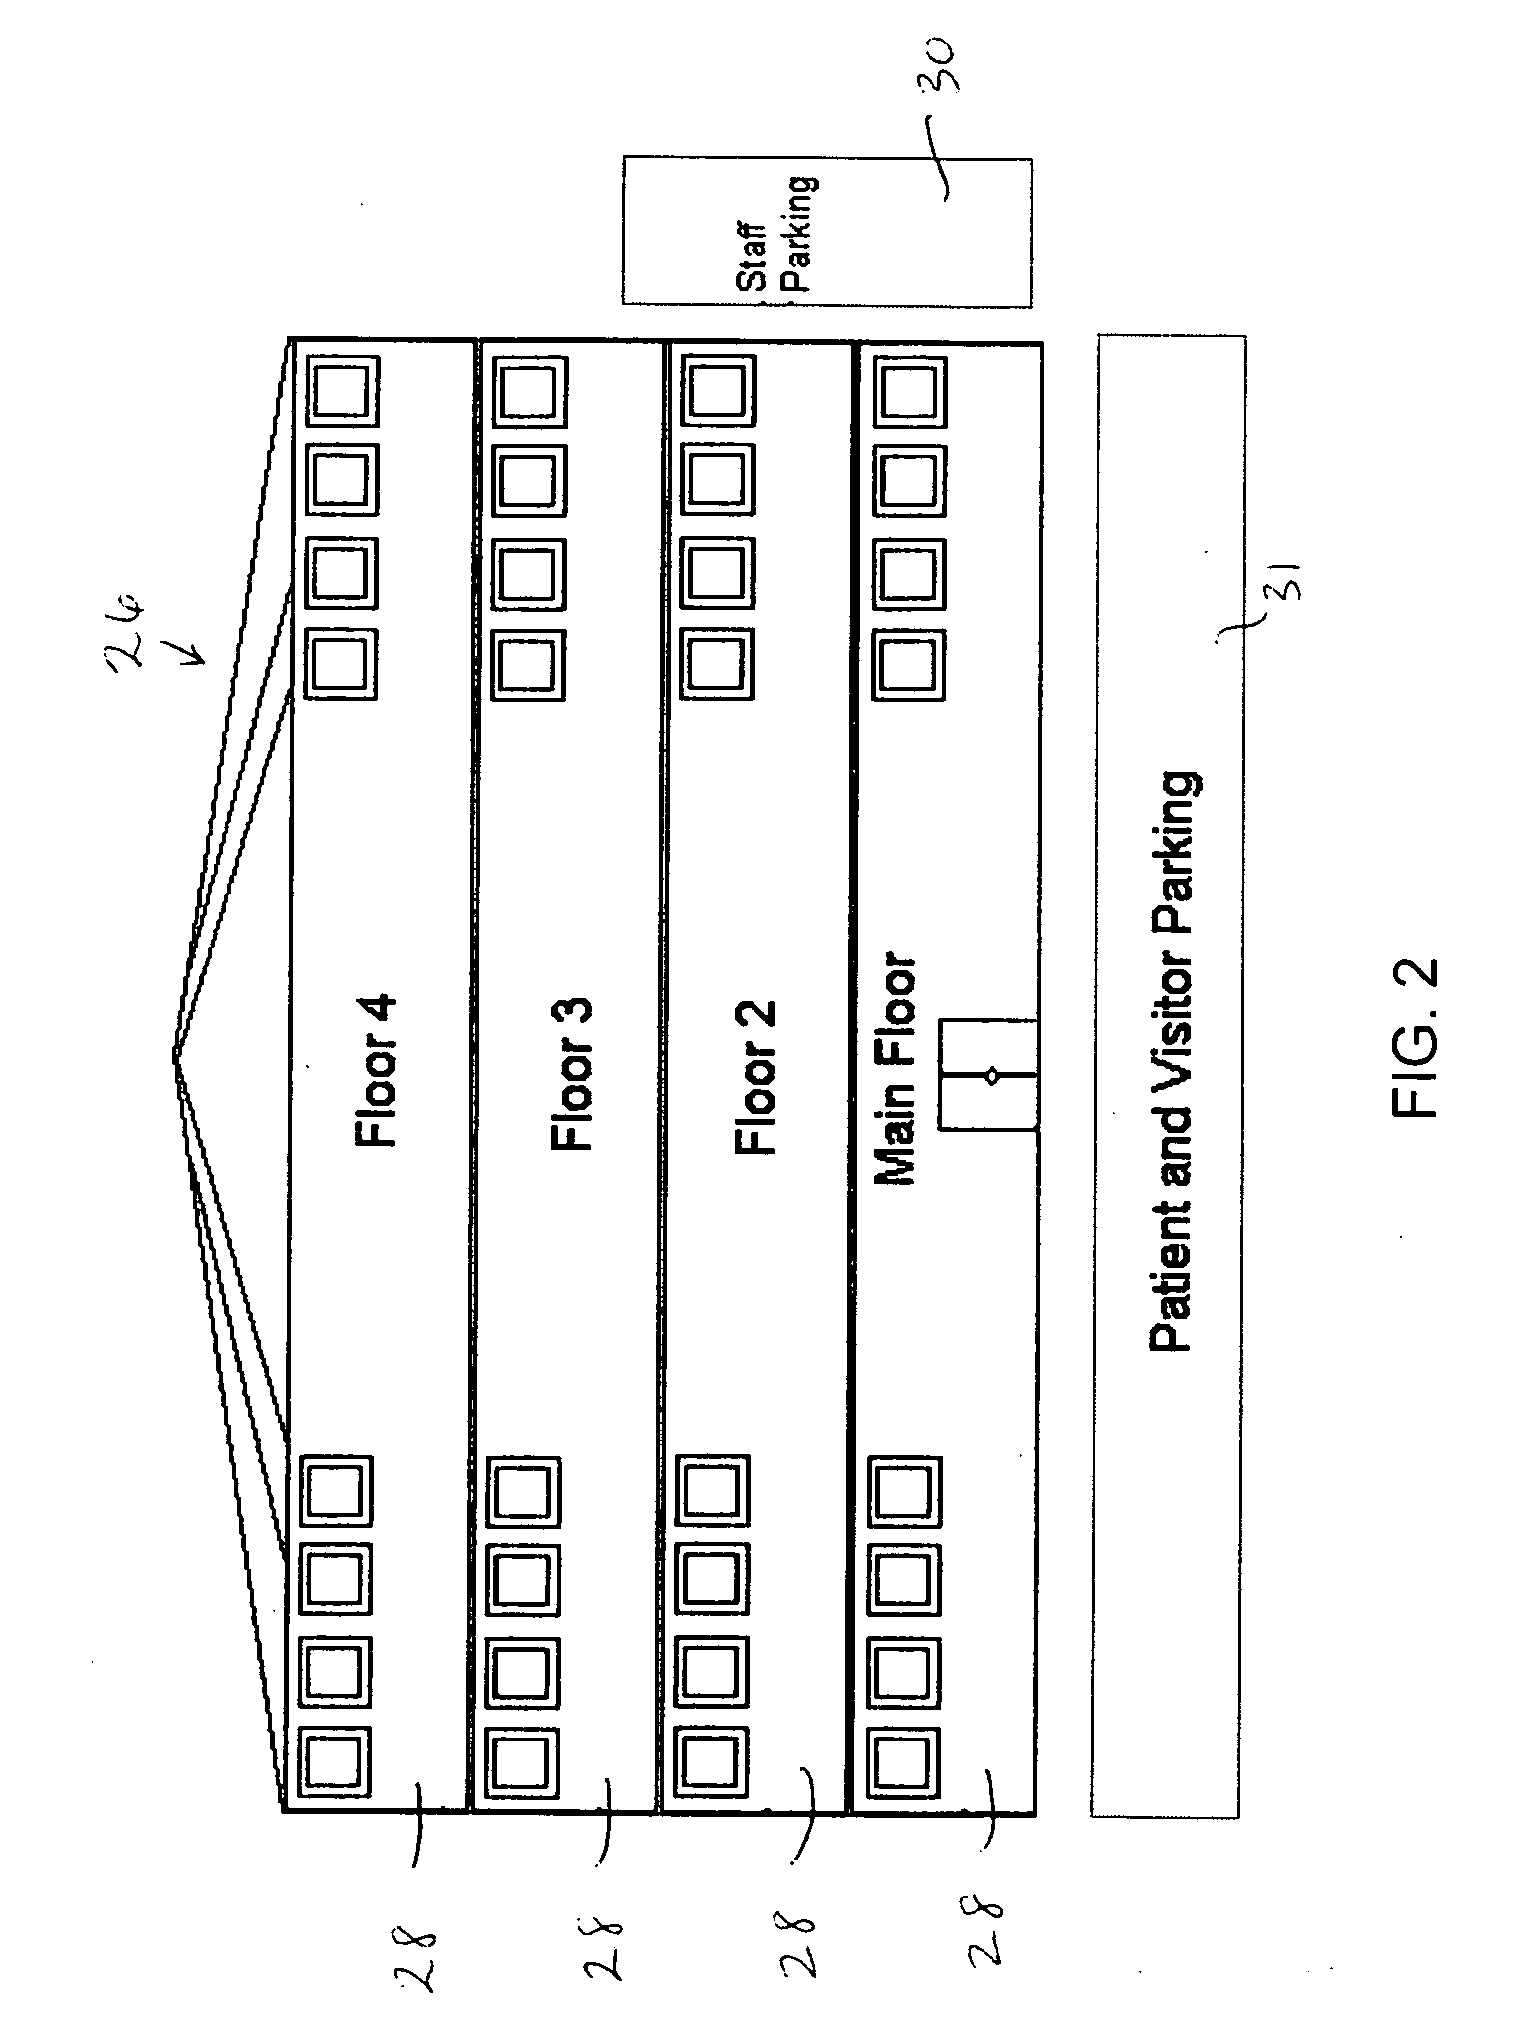 System and method for a comprehensive interactive graphical representation of a health care facility for managing patient care and health care facility resources